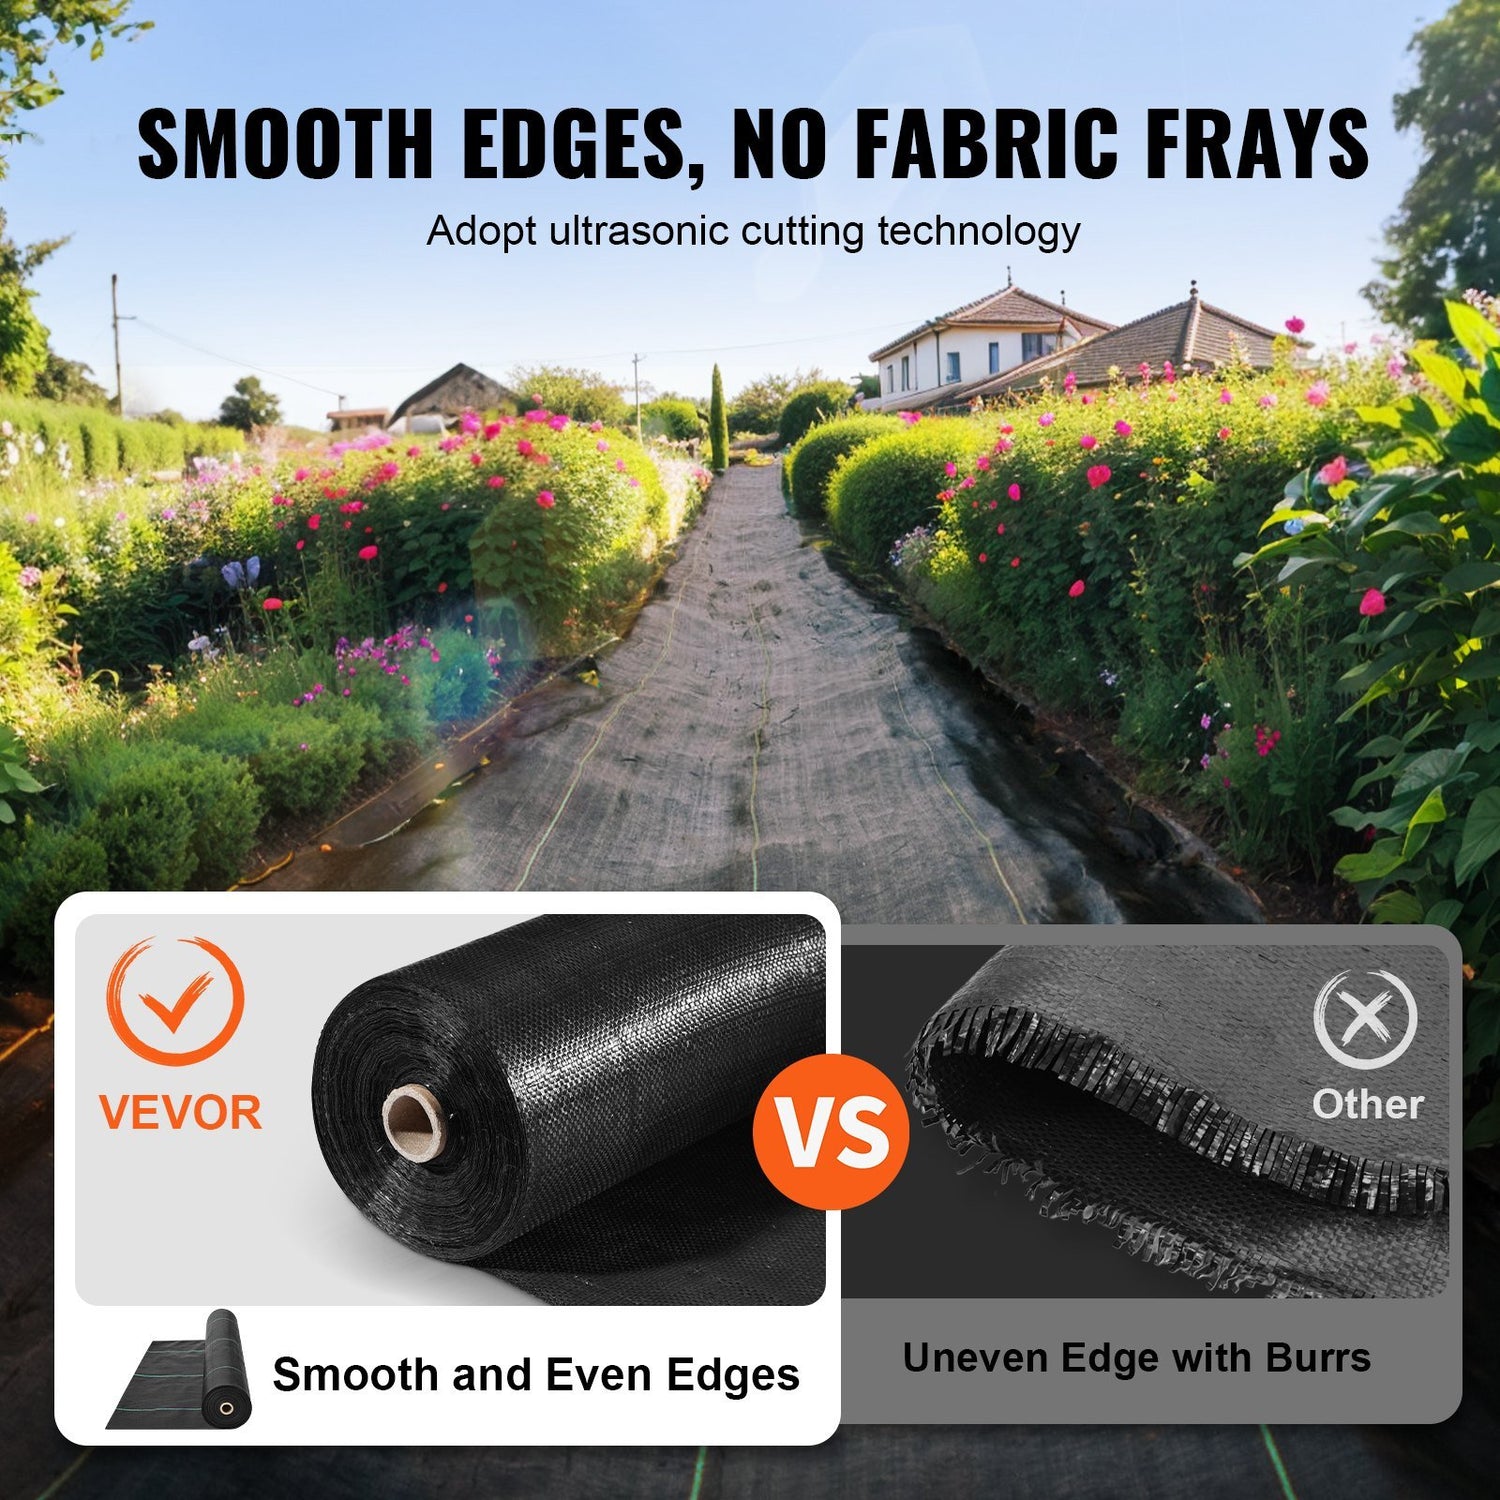 VEVOR Weed Barrier Landscape Fabric 6*300FT Heavy Duty Woven PP Weed Control Mat - Ethereal Company